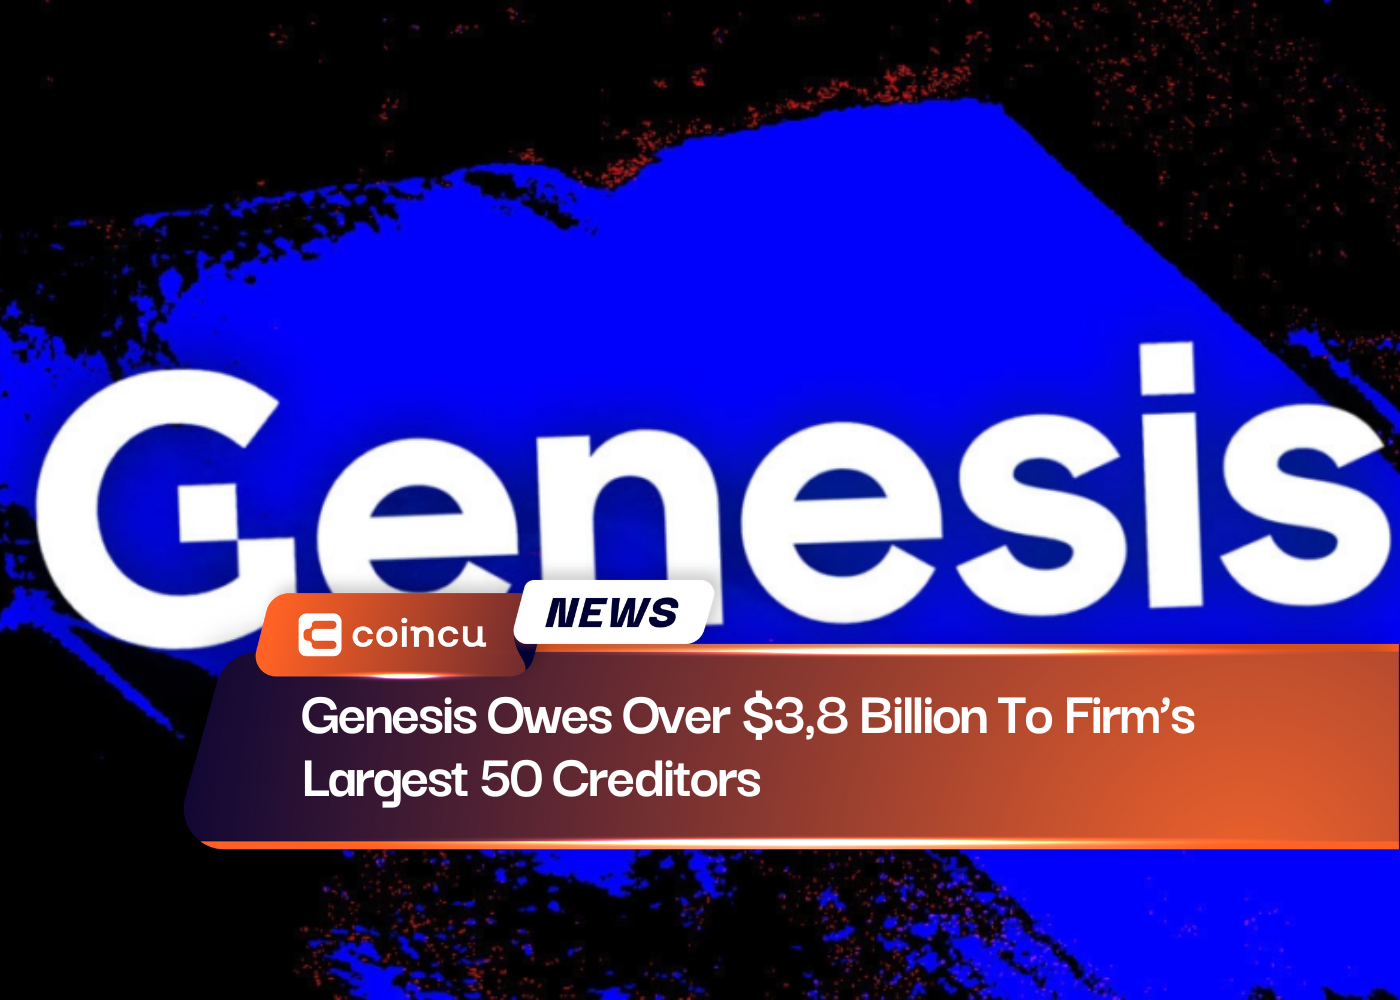 Genesis Owes Over $3,8 Billion To Firm’s Largest 50 Creditors